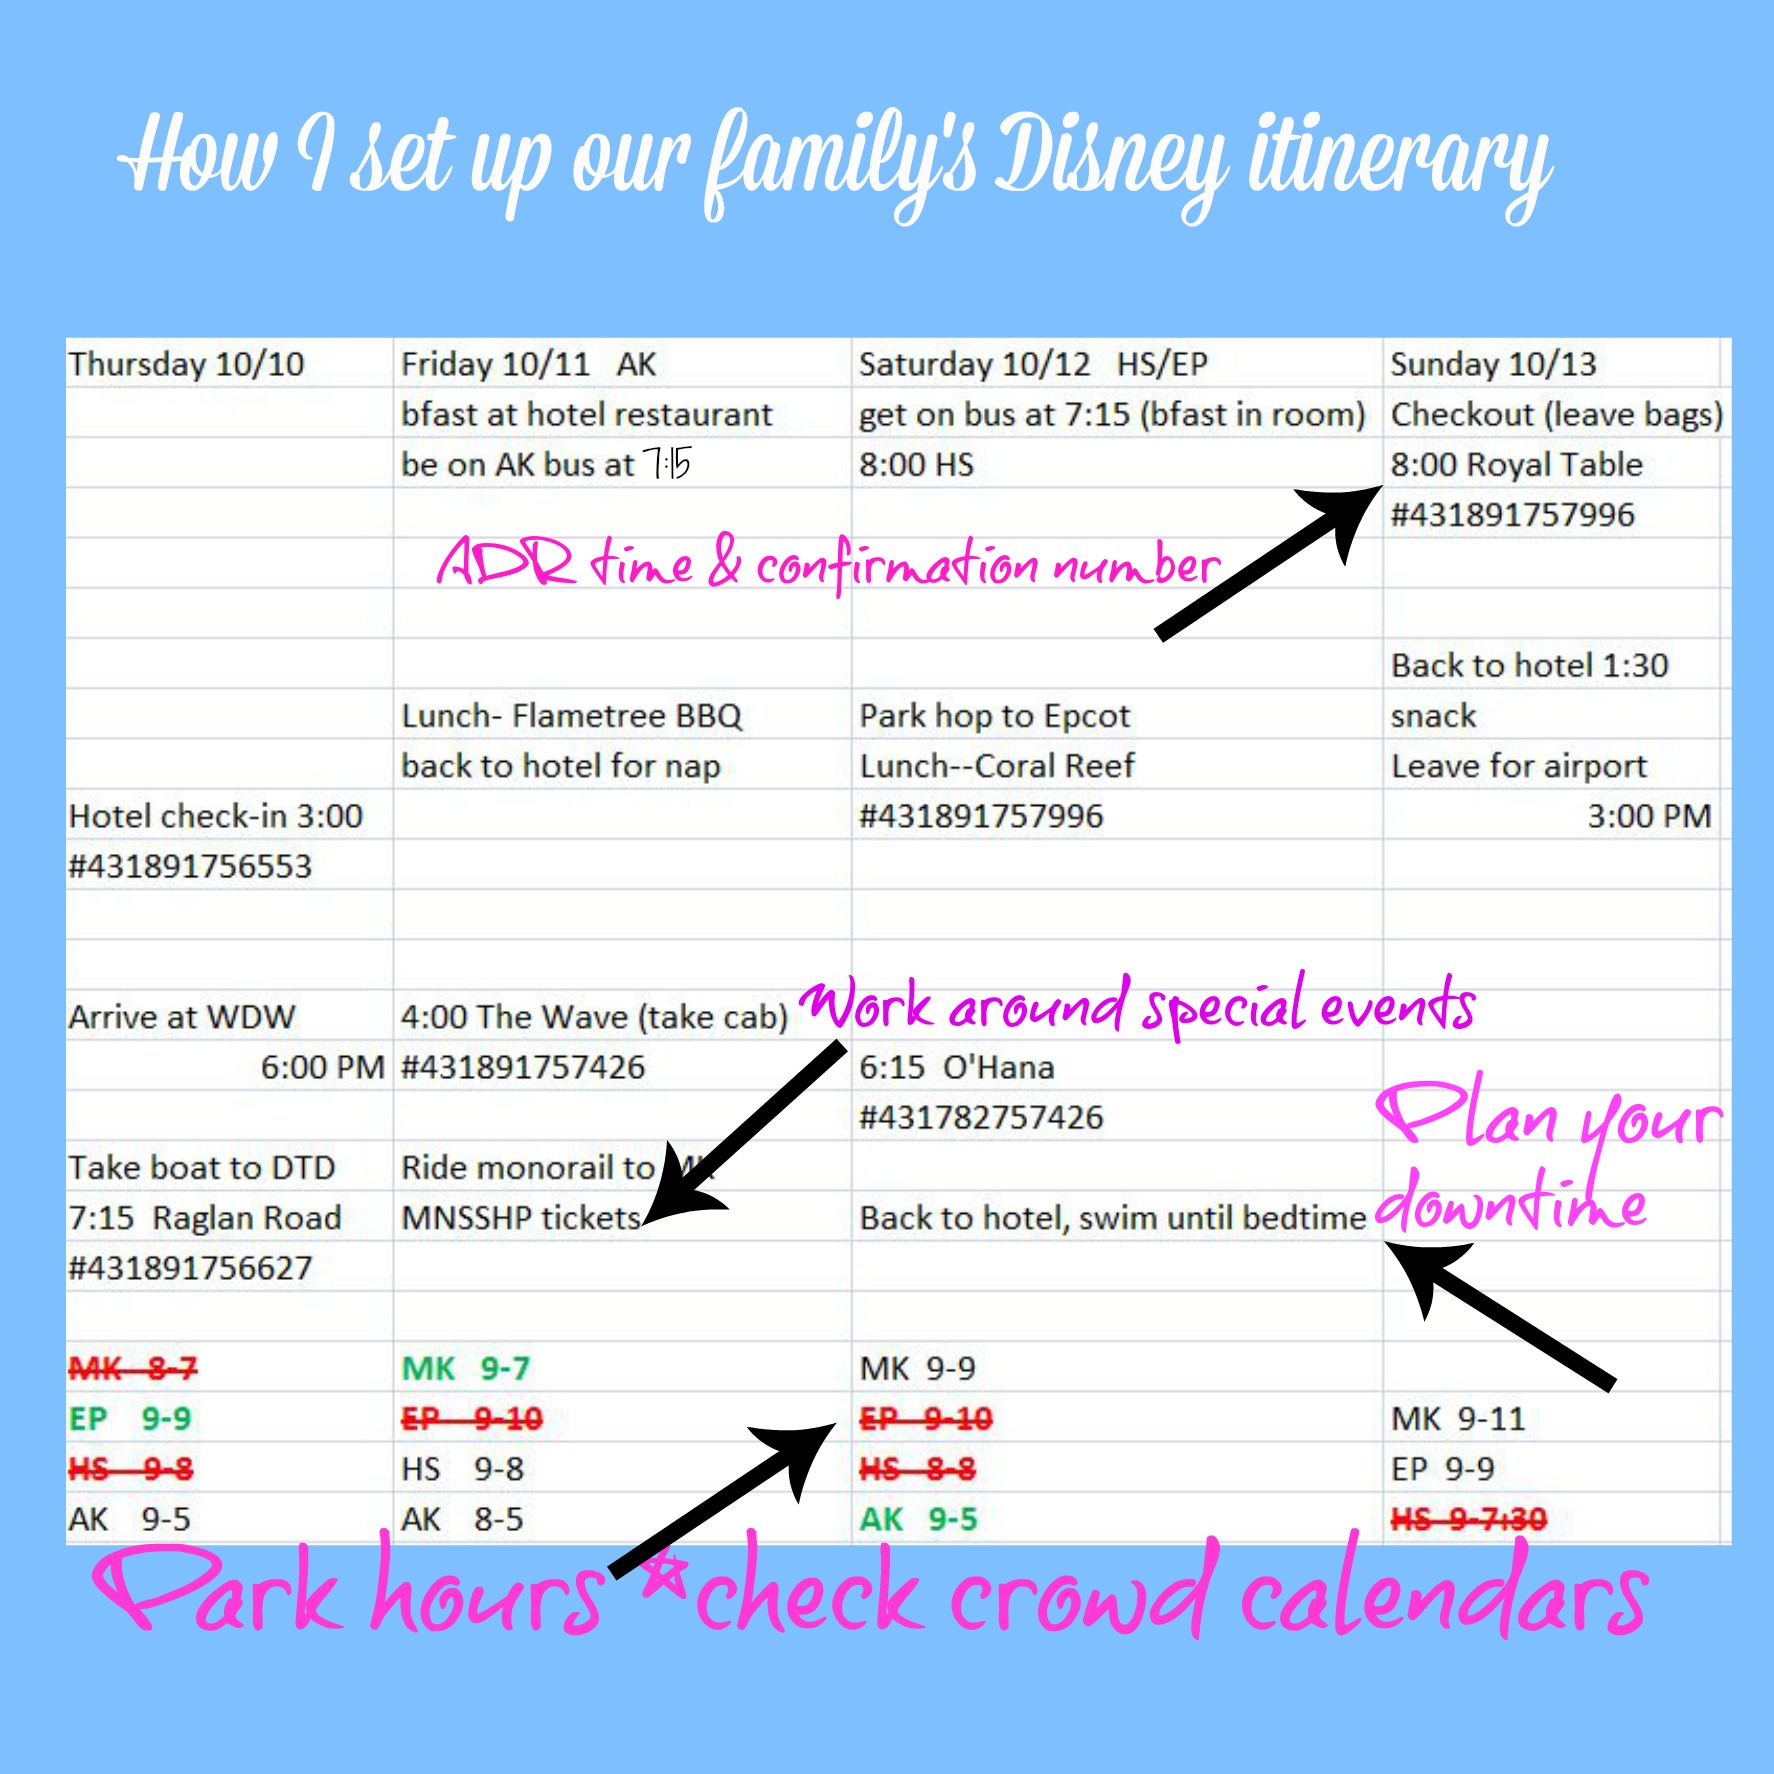 A spreadsheet can help with your Disney planning.